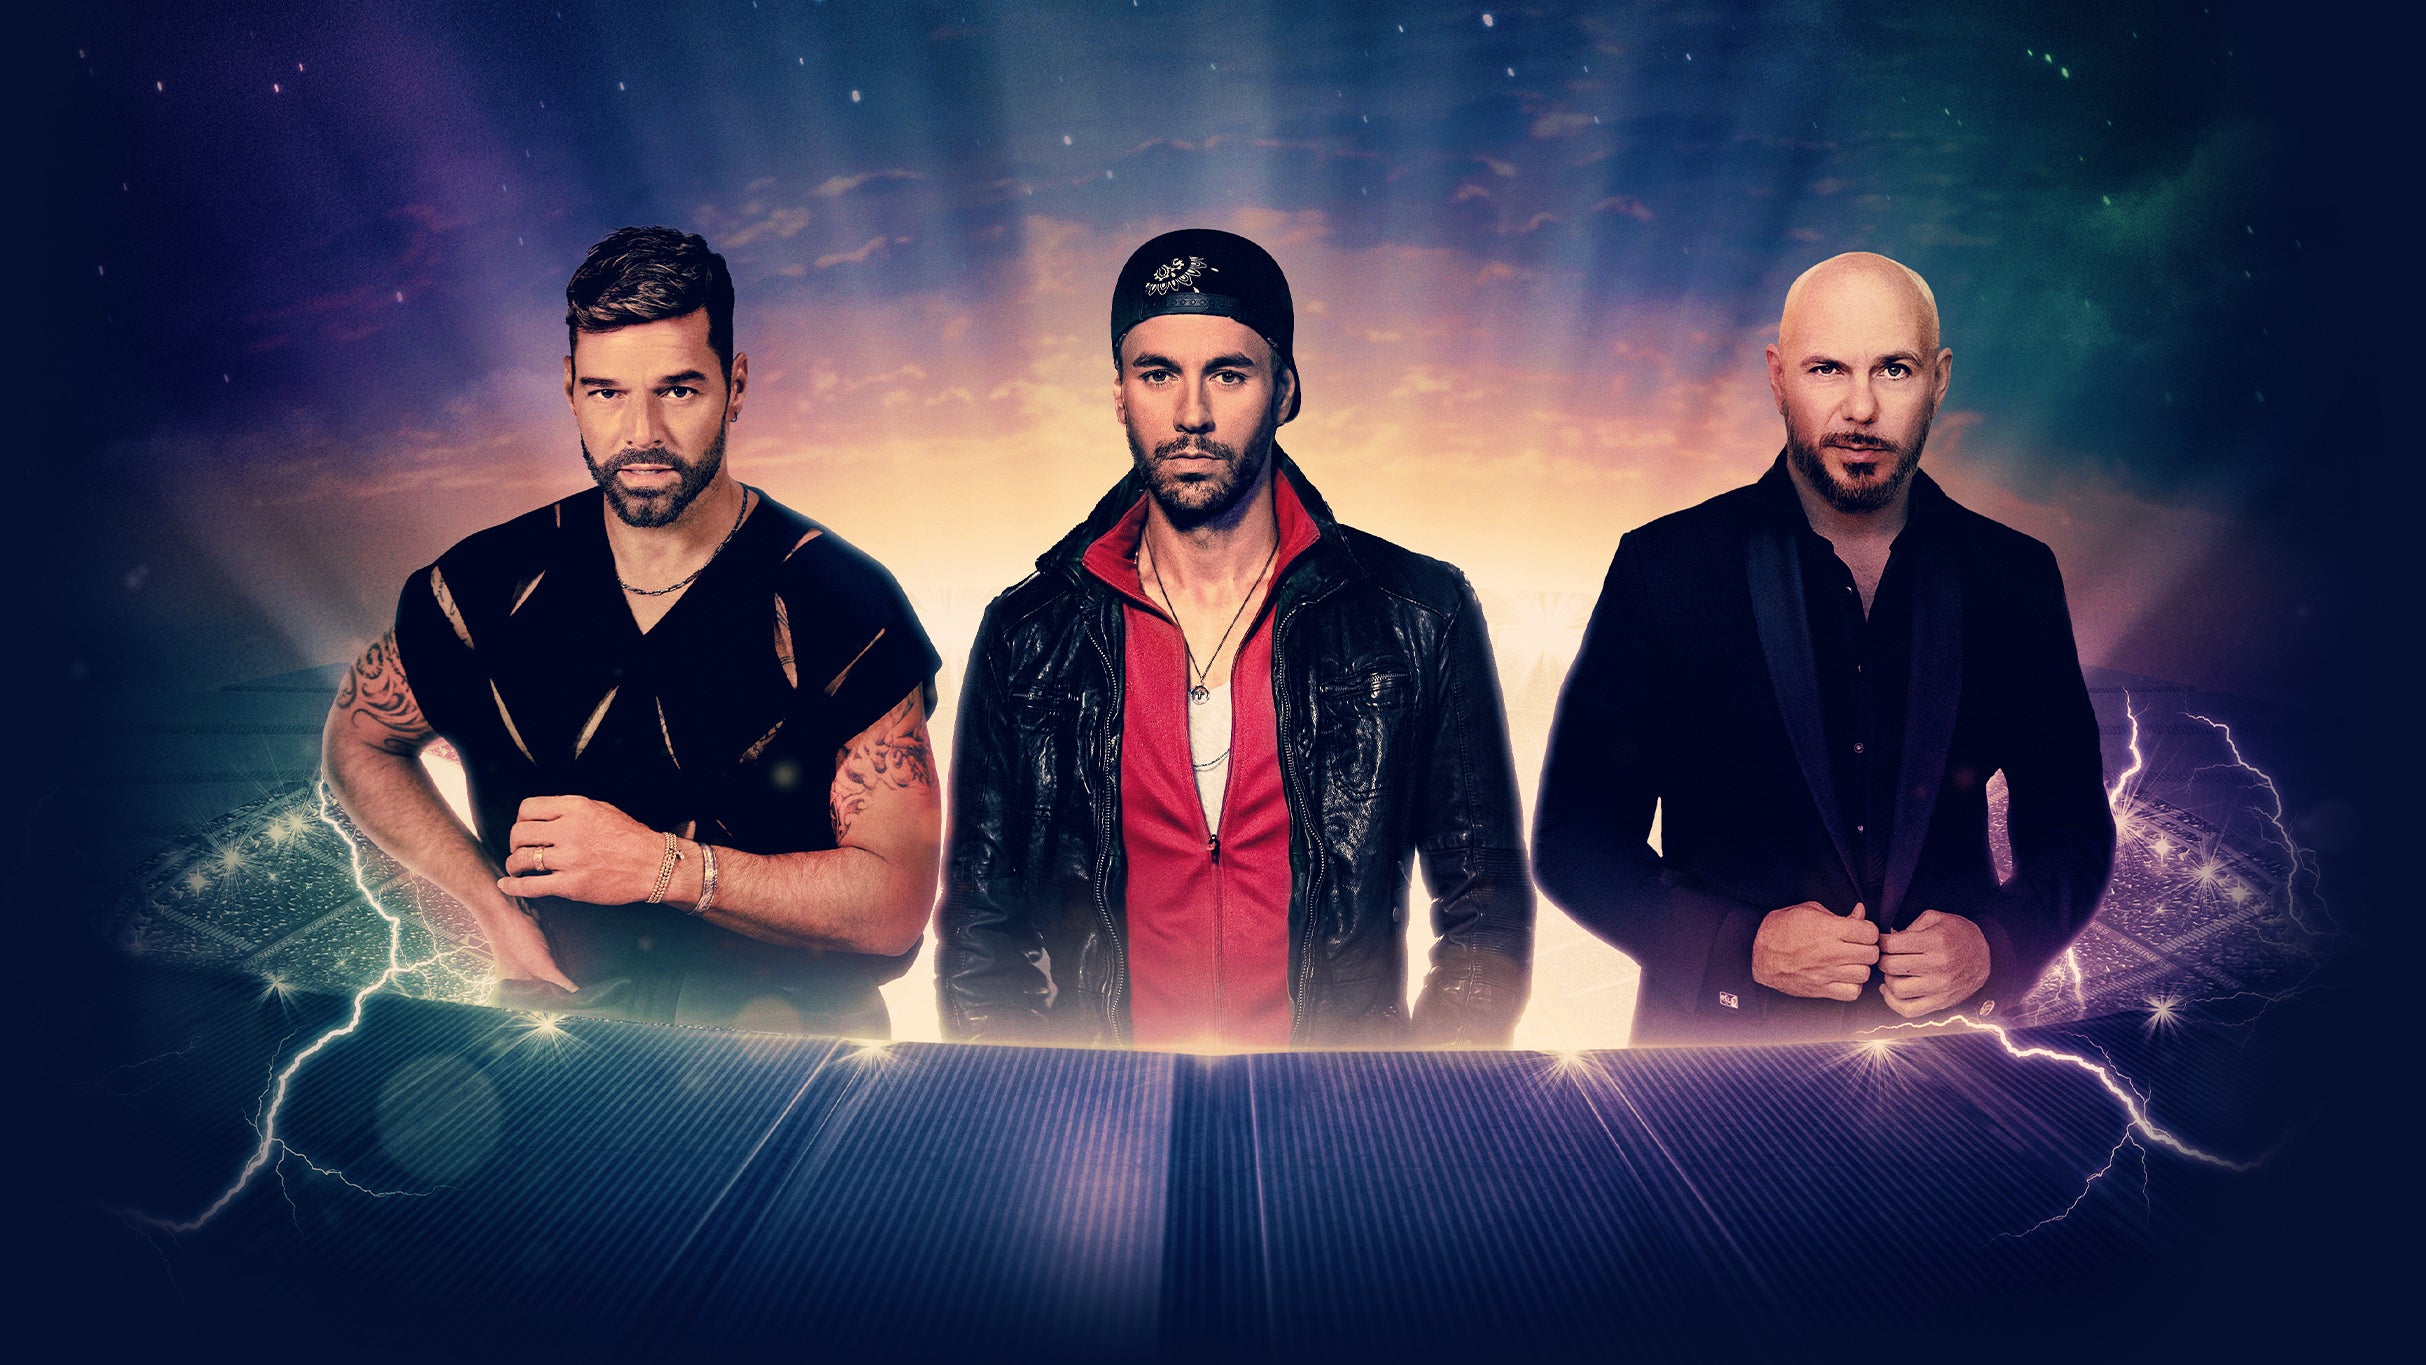 members only presale password for Enrique Iglesias, Pitbull, Ricky Martin: The Trilogy Tour face value tickets in San Antonio at AT&T Center